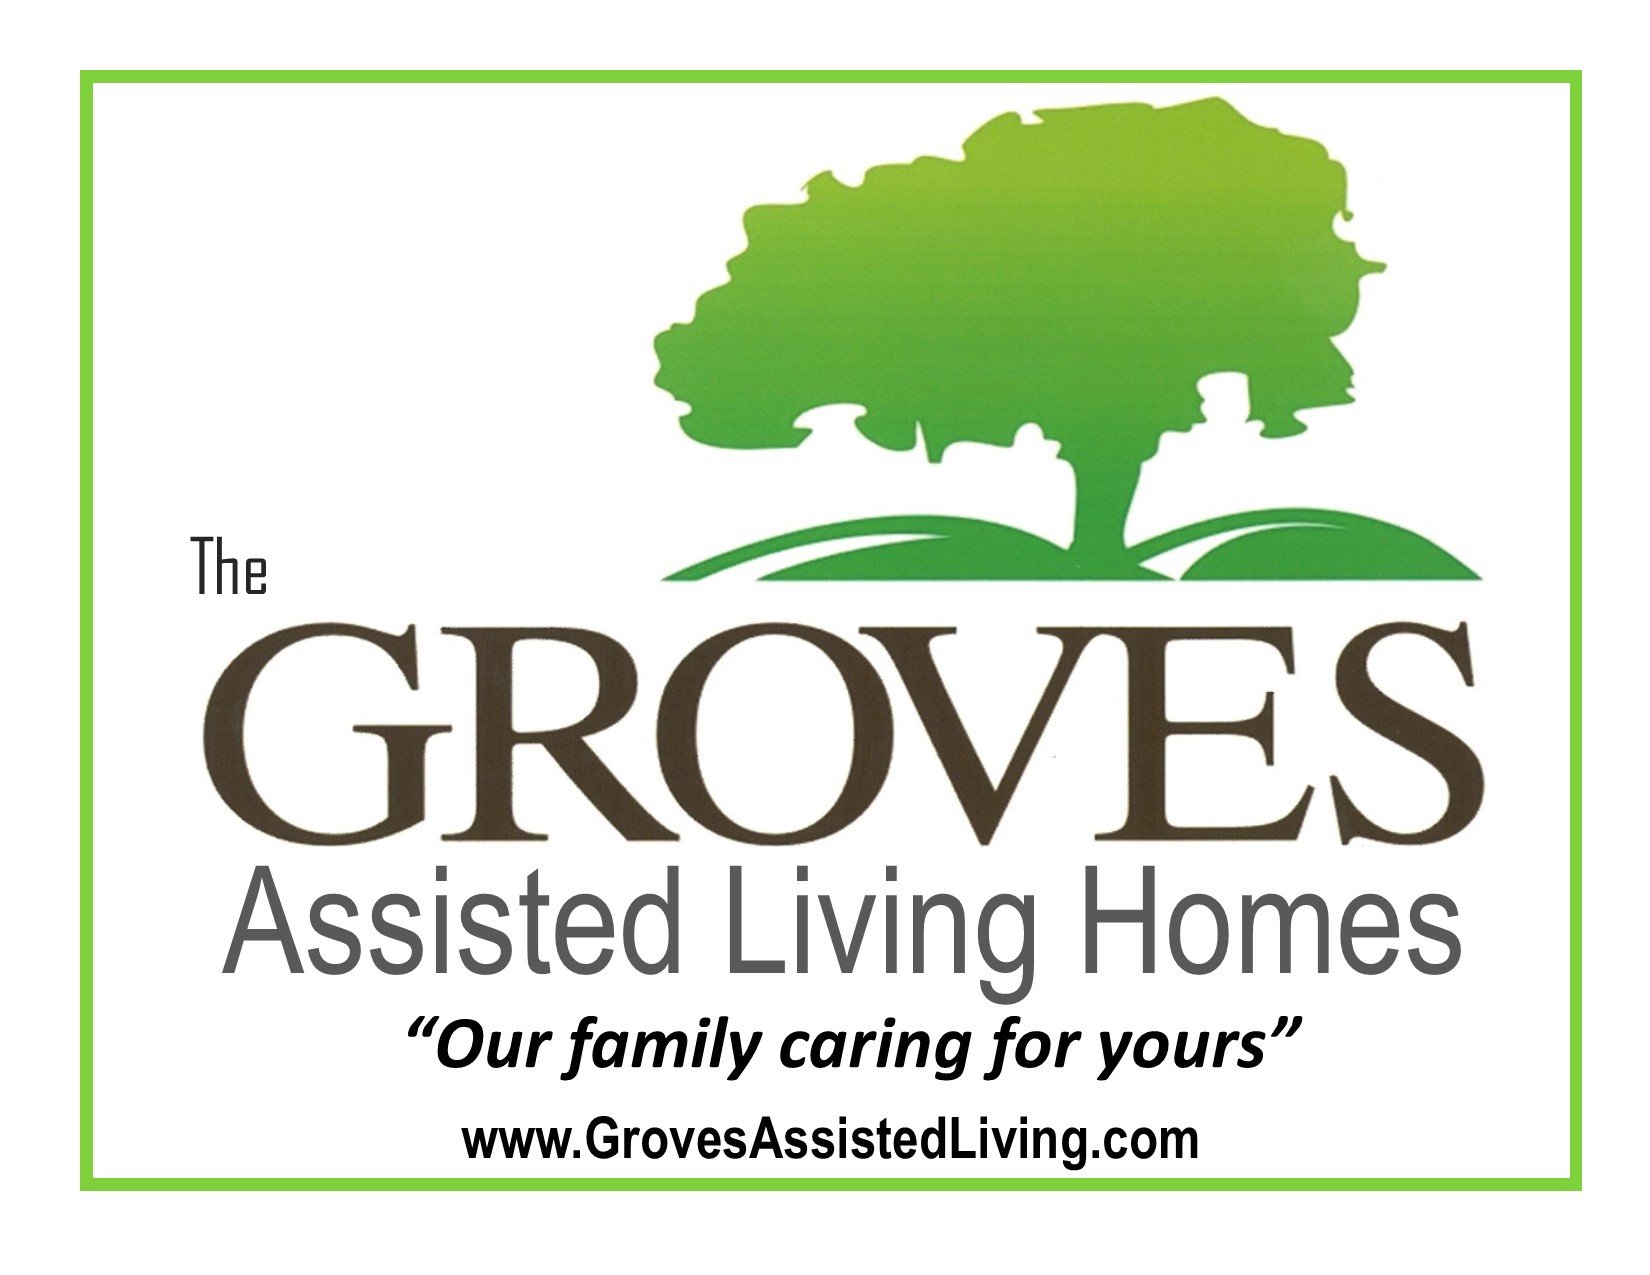 Groves Assisted Living Homes LLC